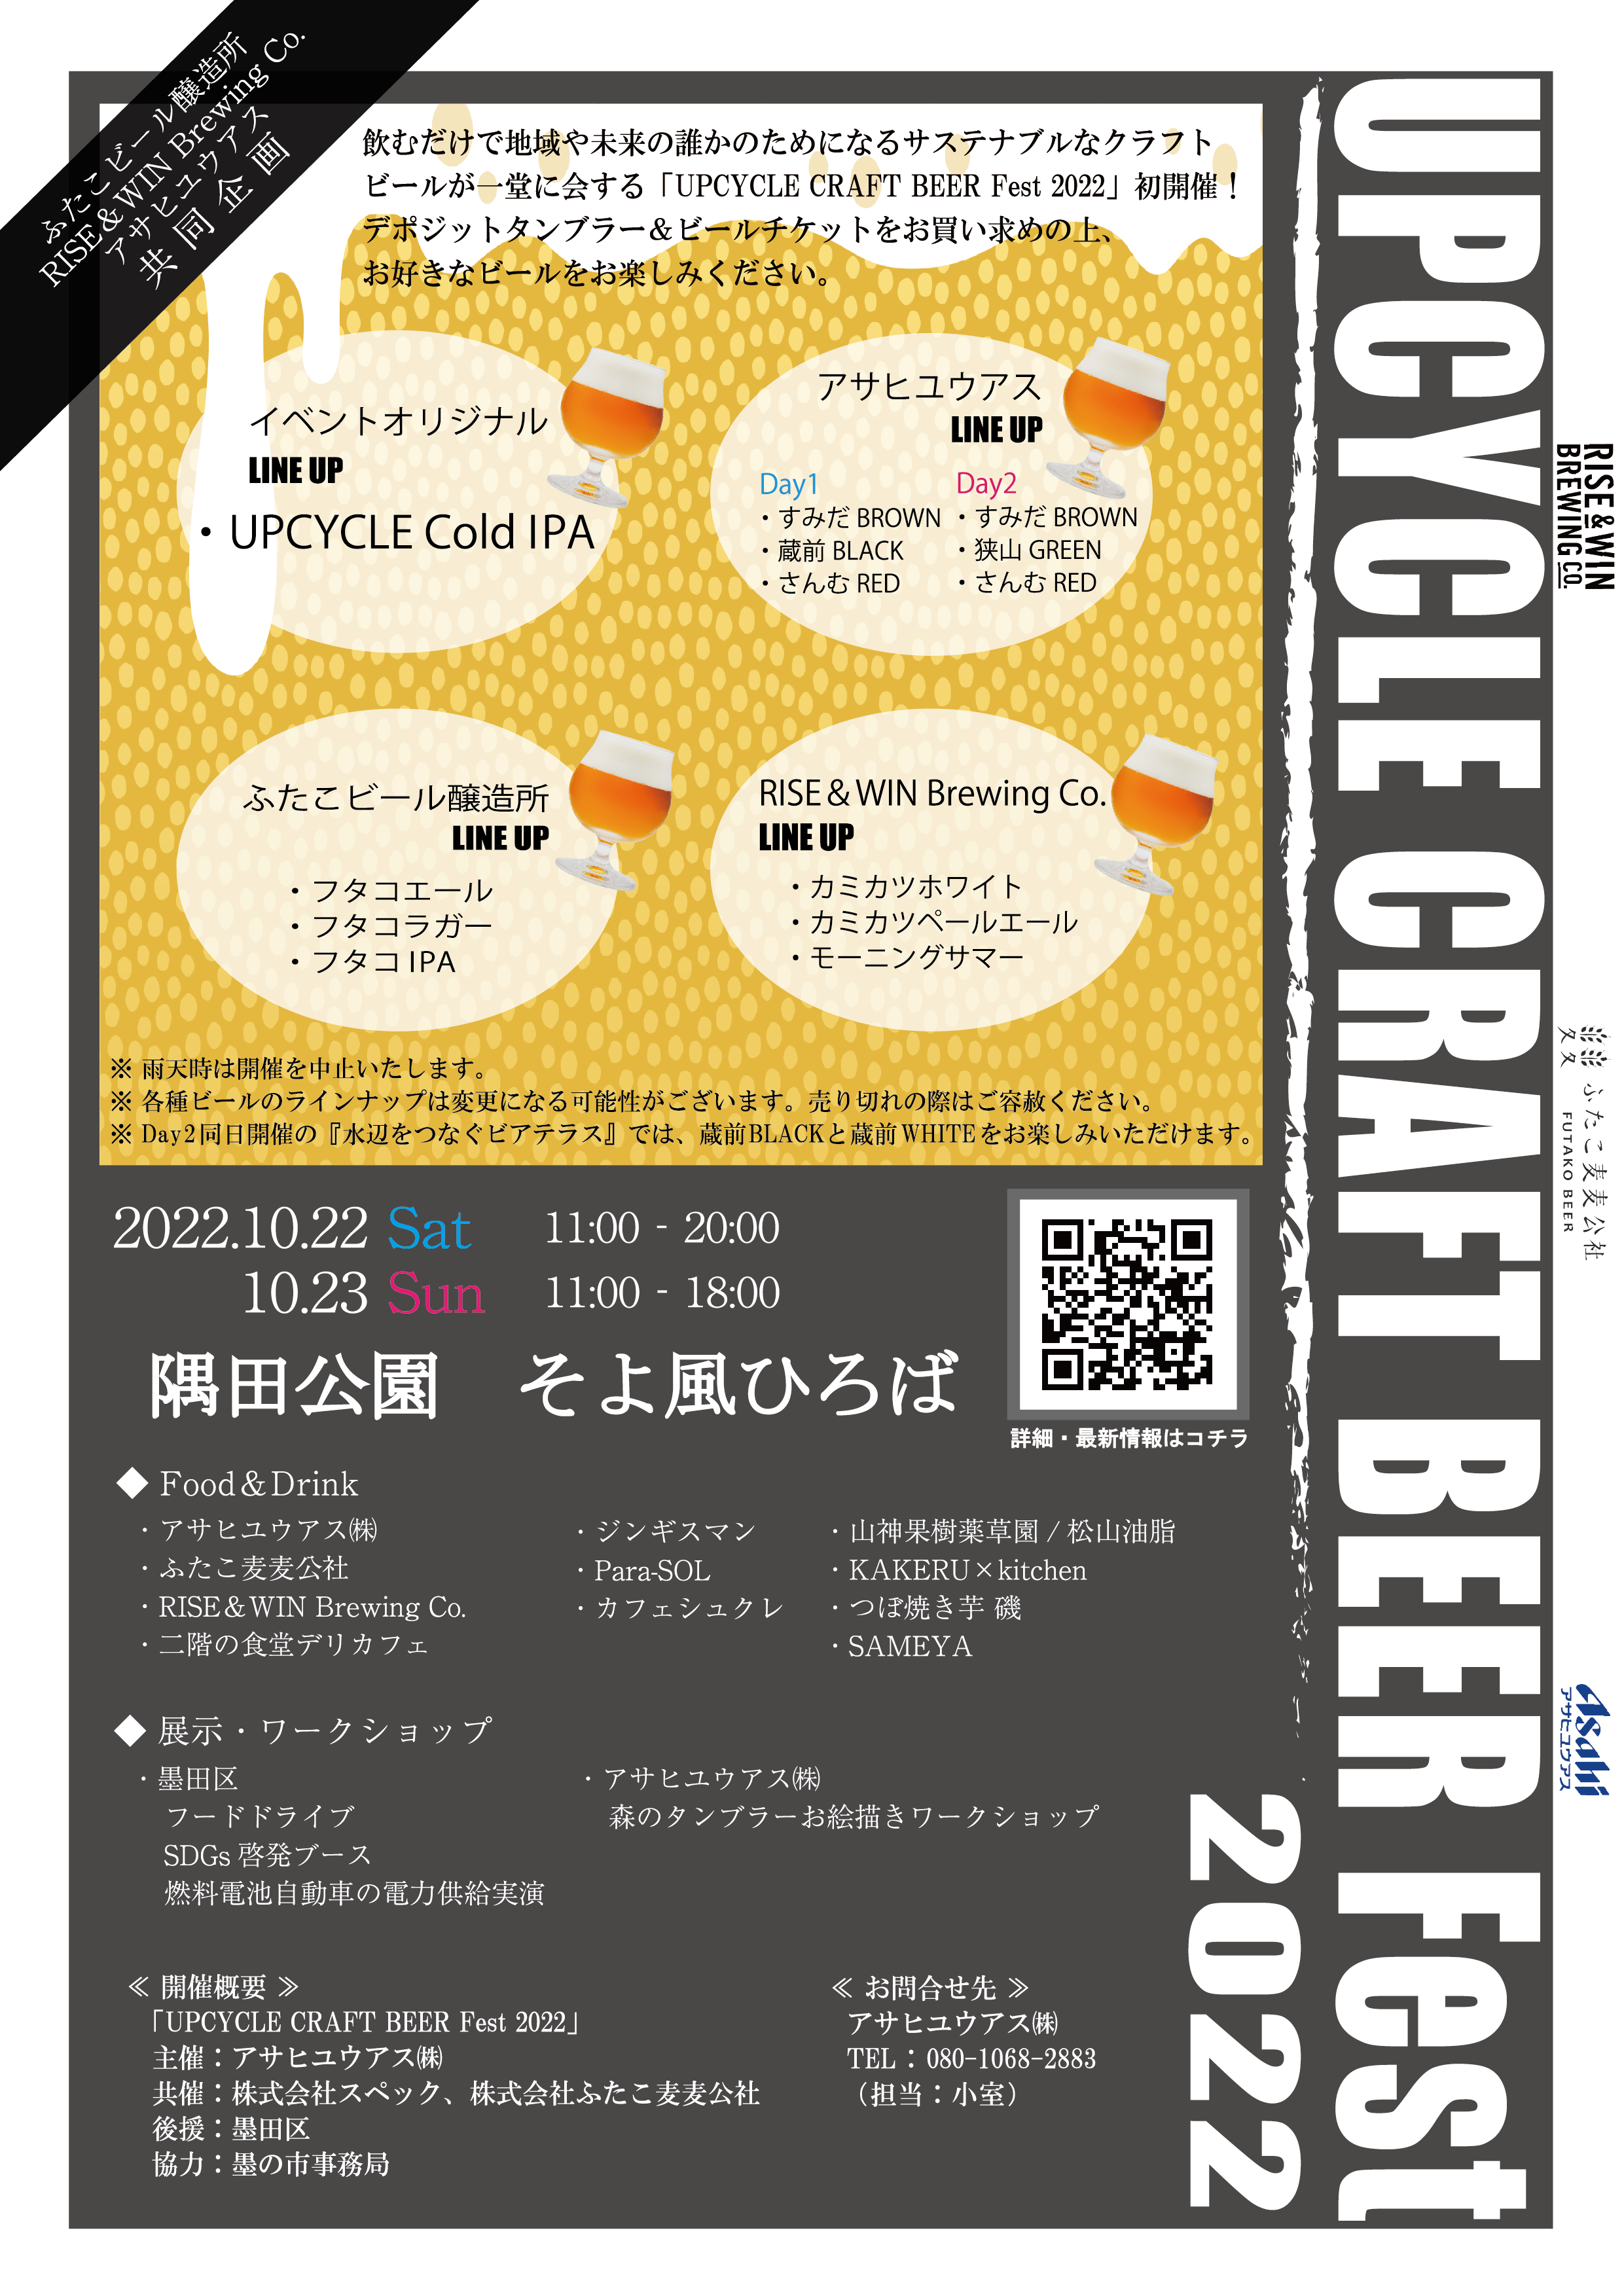 UPCYCLE CRAFT BEER Fest 2022を開催します！